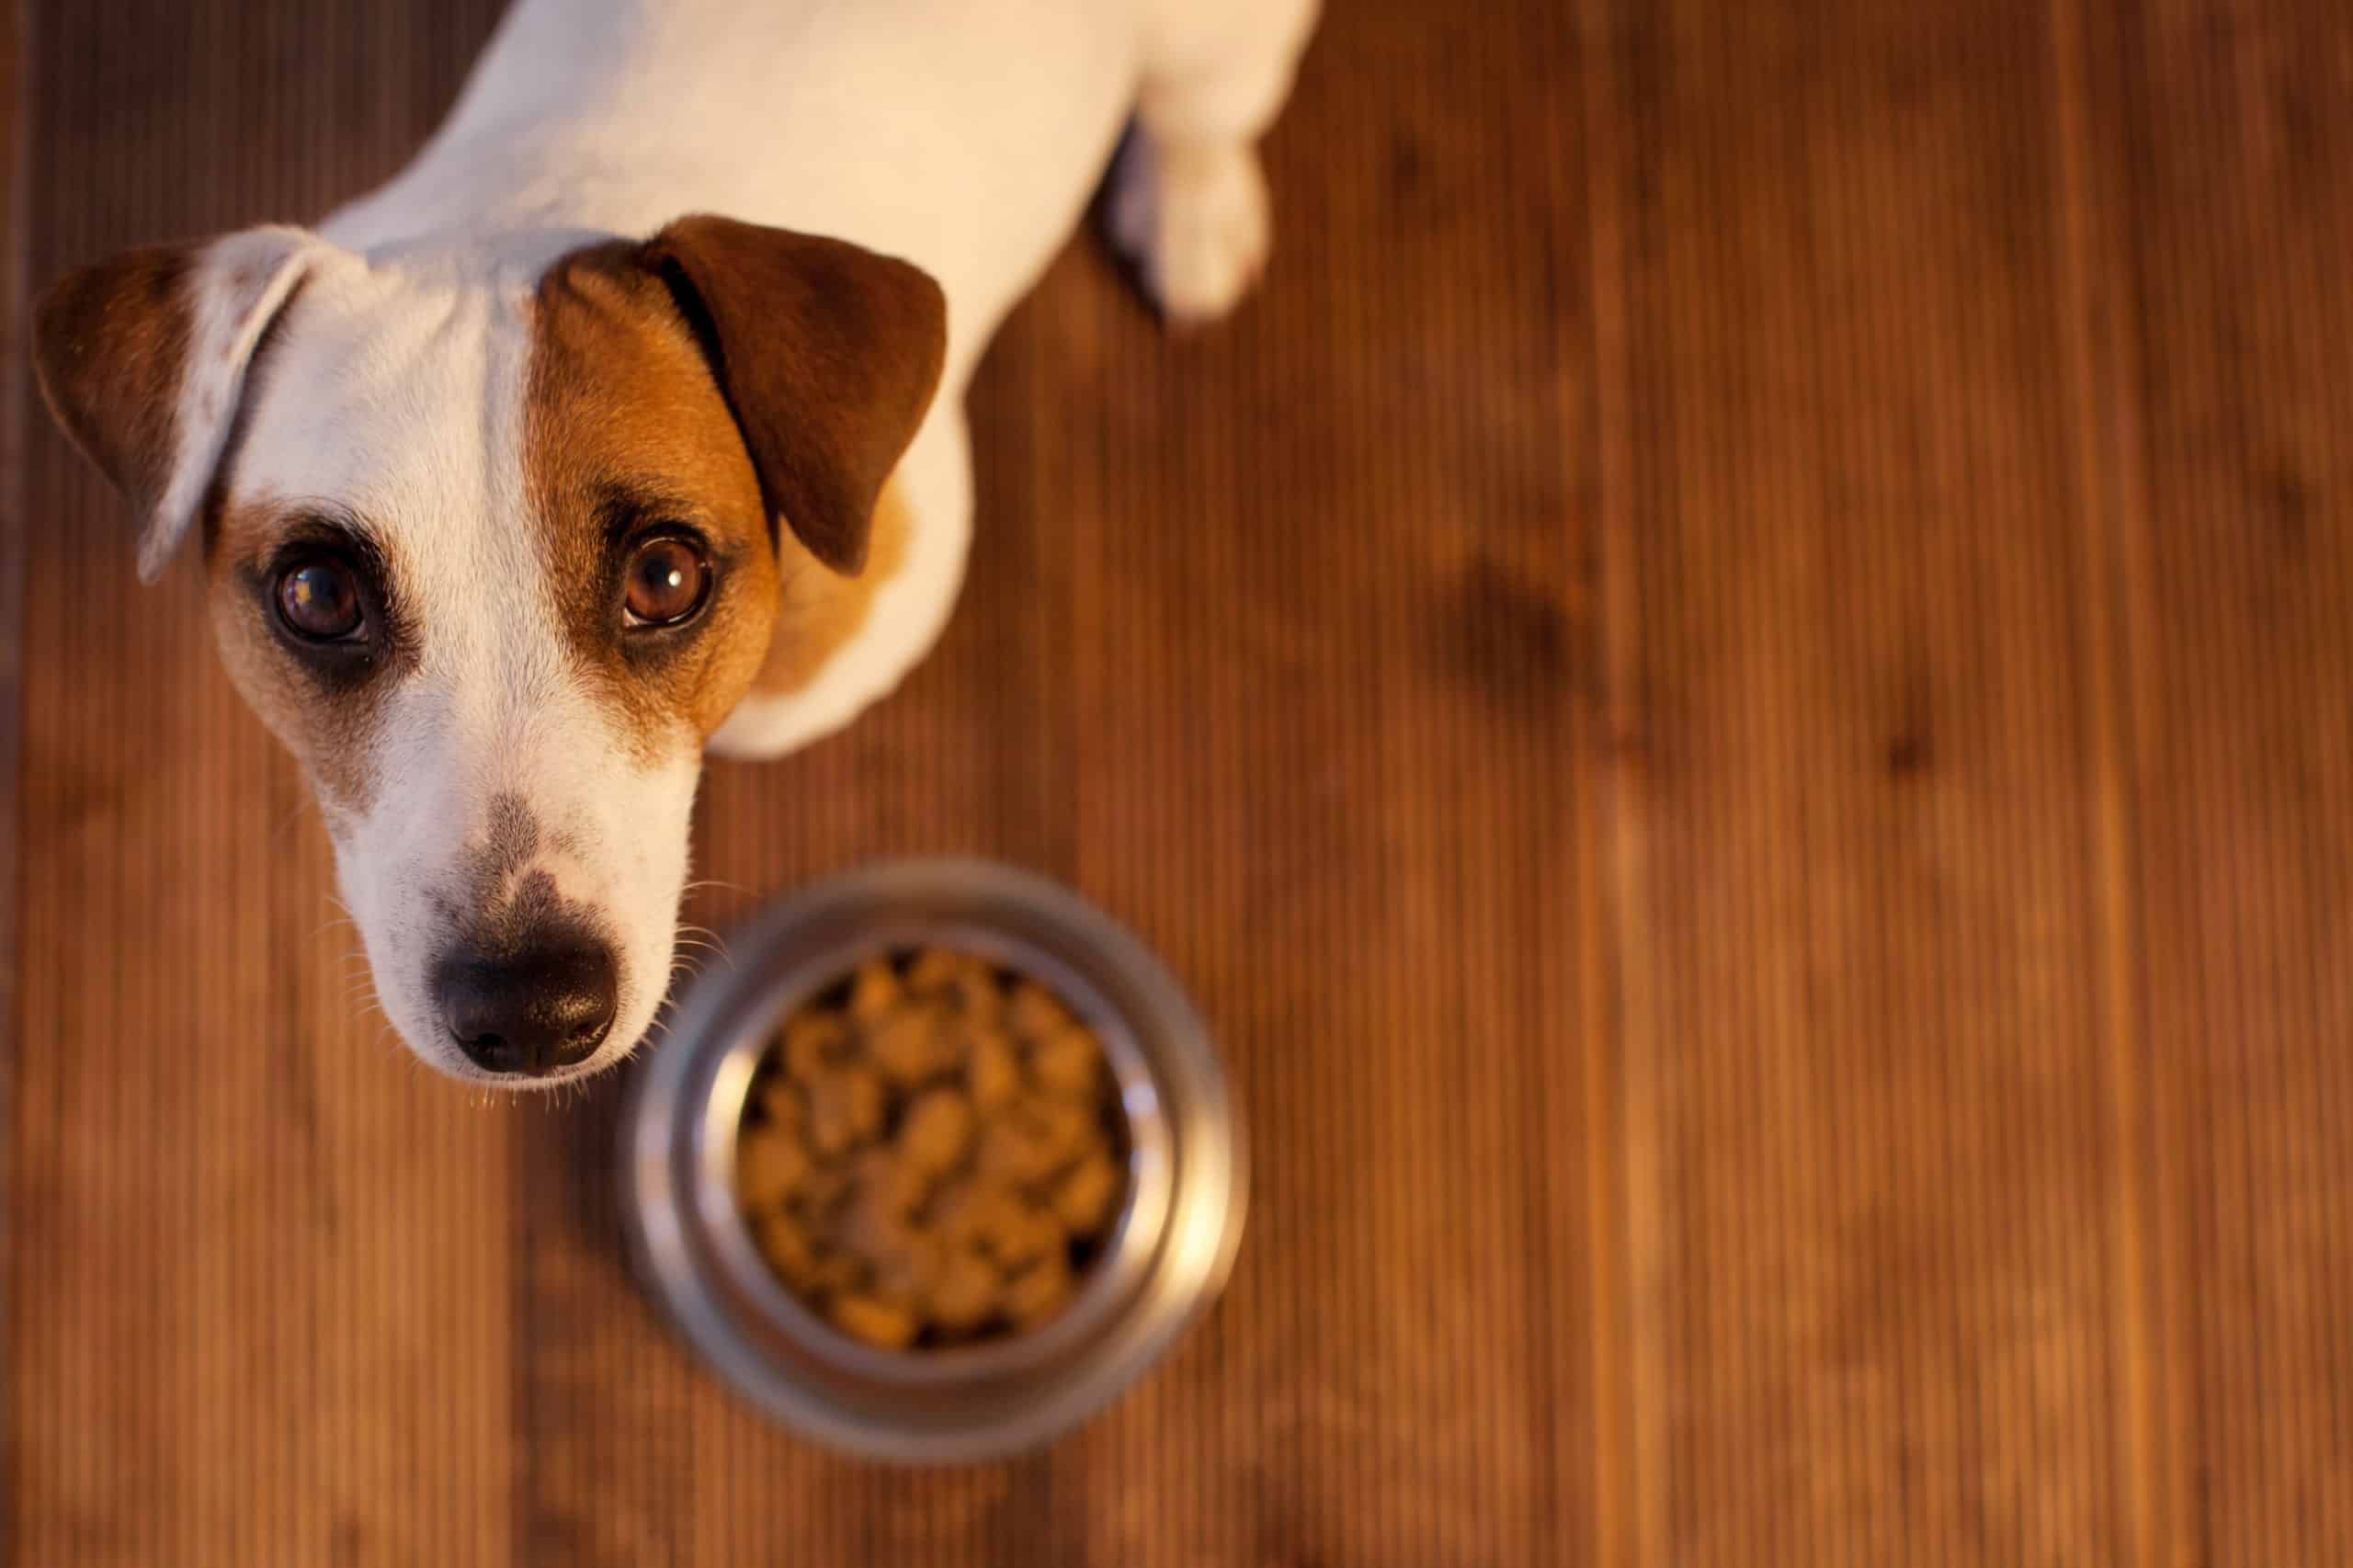 Why doesn’t my dog chew his food?